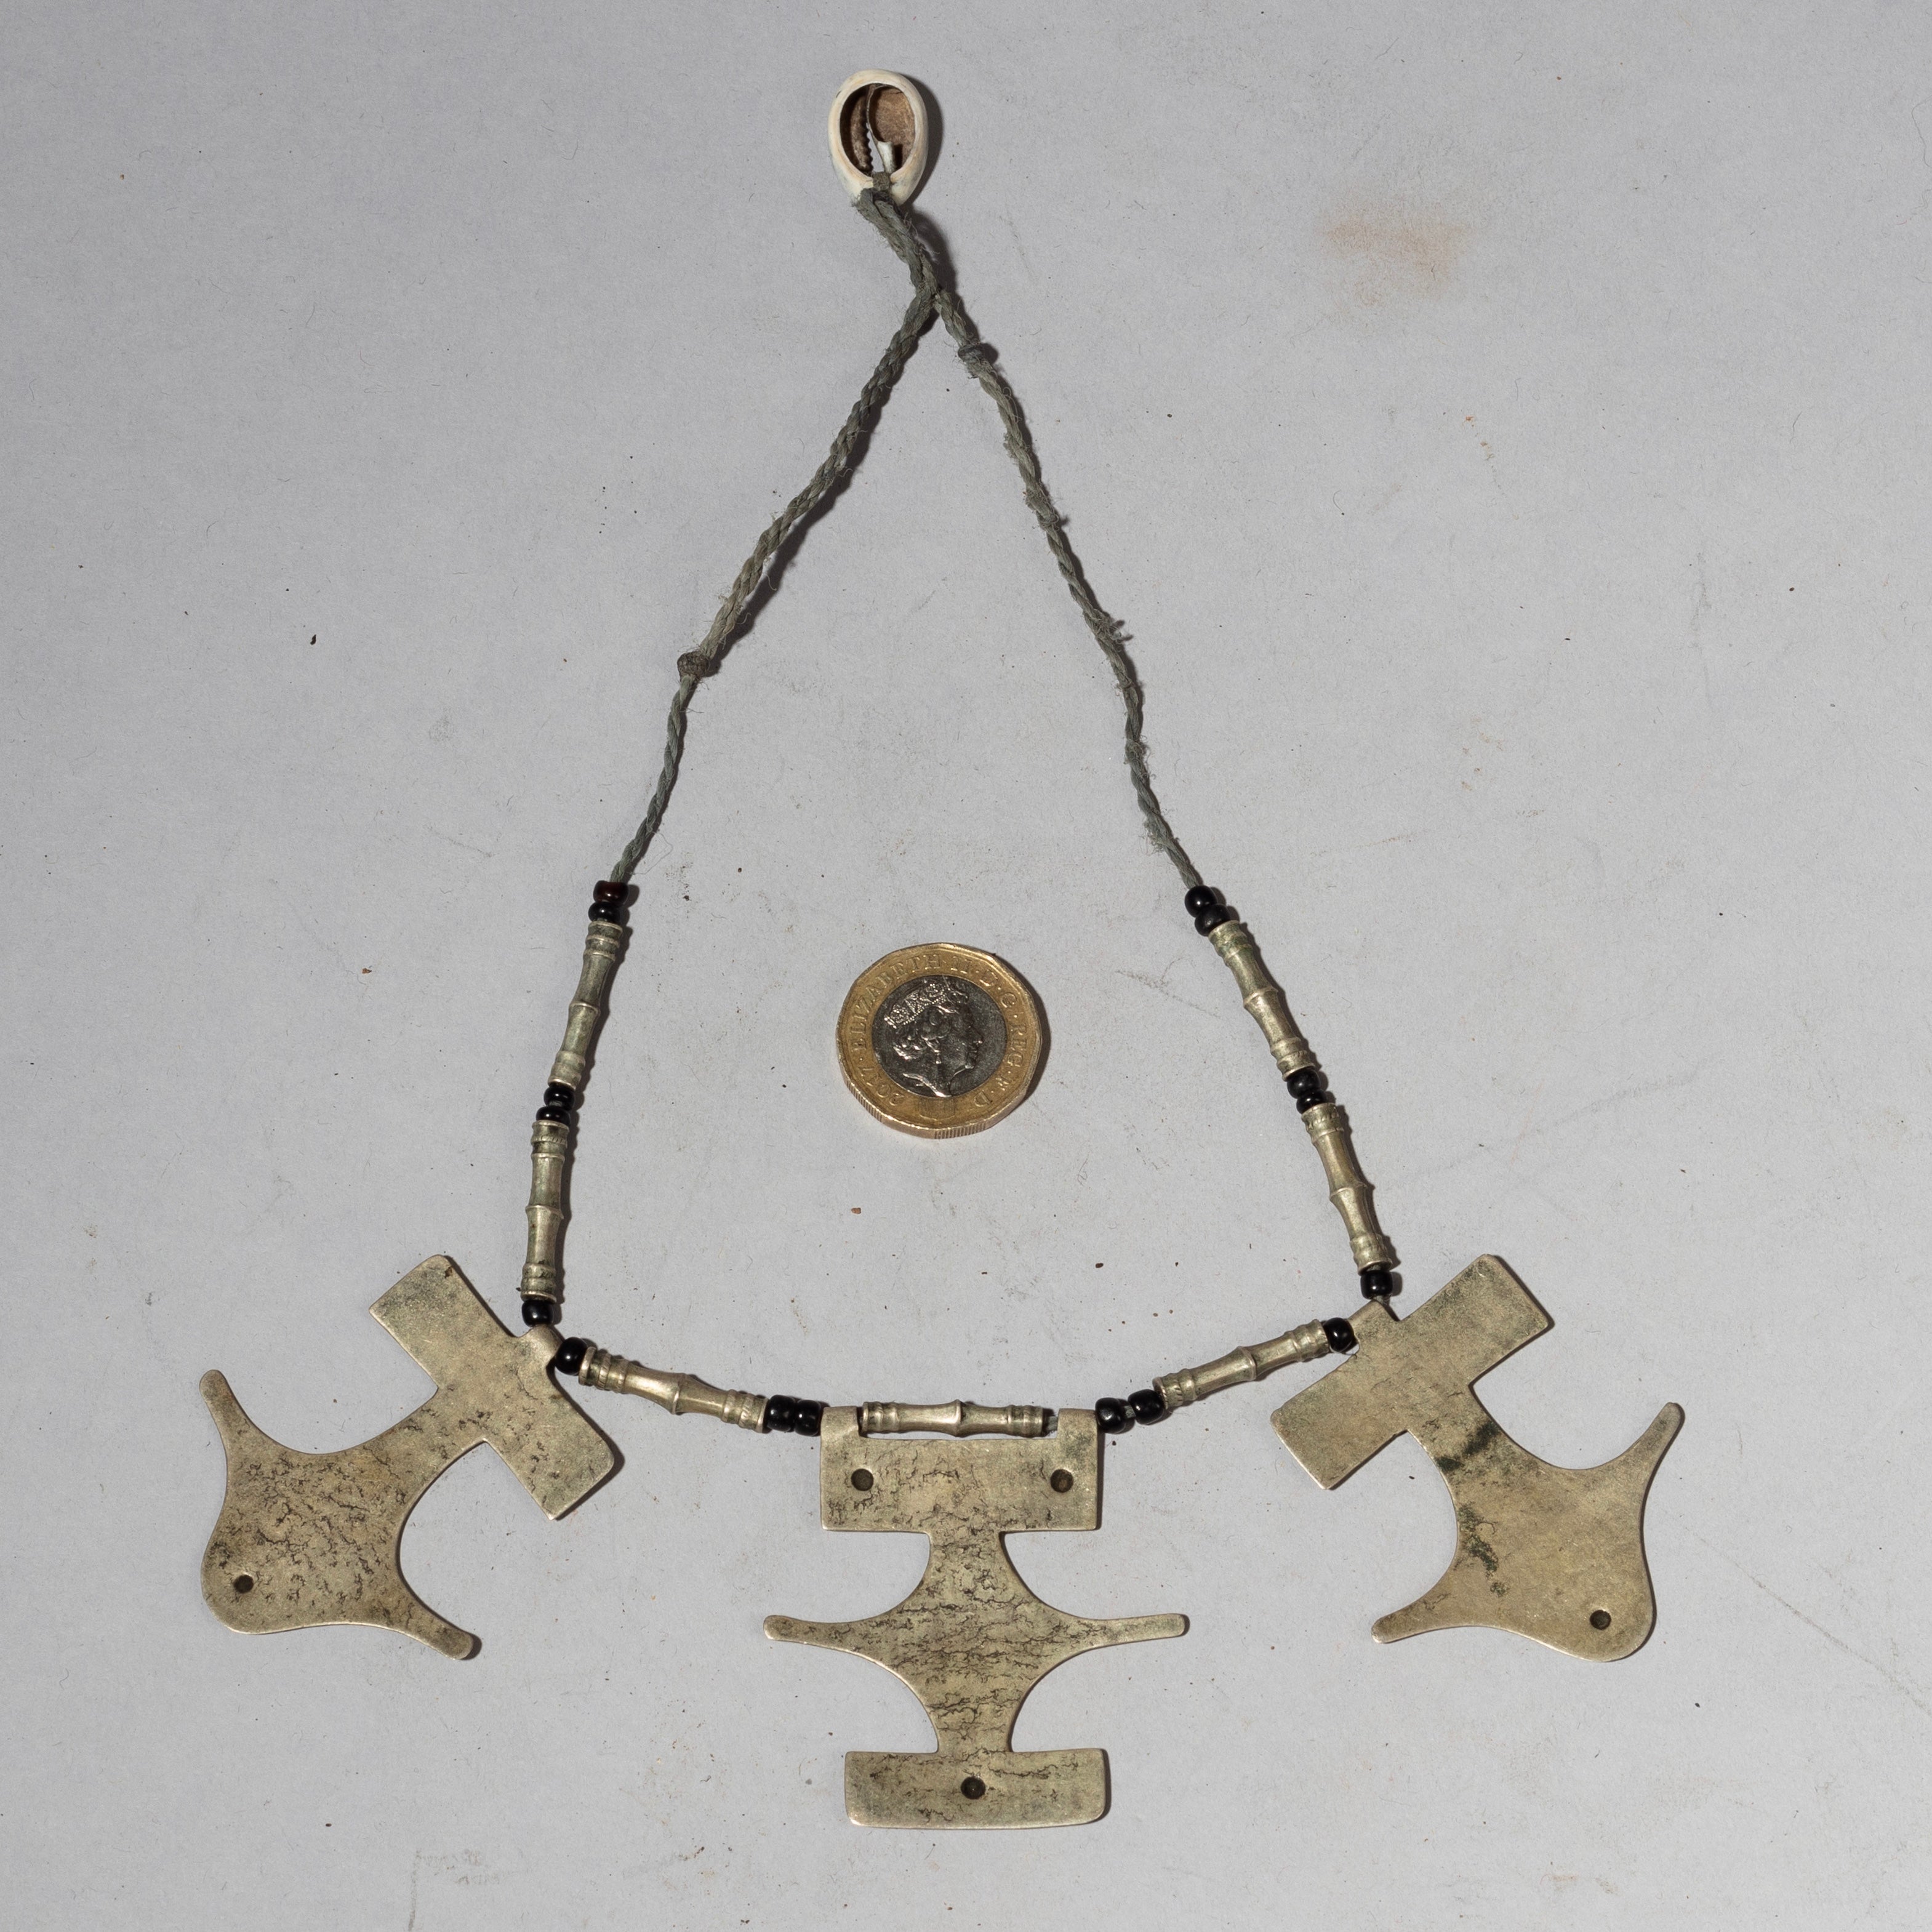 A DELICATE SILVER NECKLACE FROM TUAREG TRIBE OF NIGER W.AFRICA( No 2252)